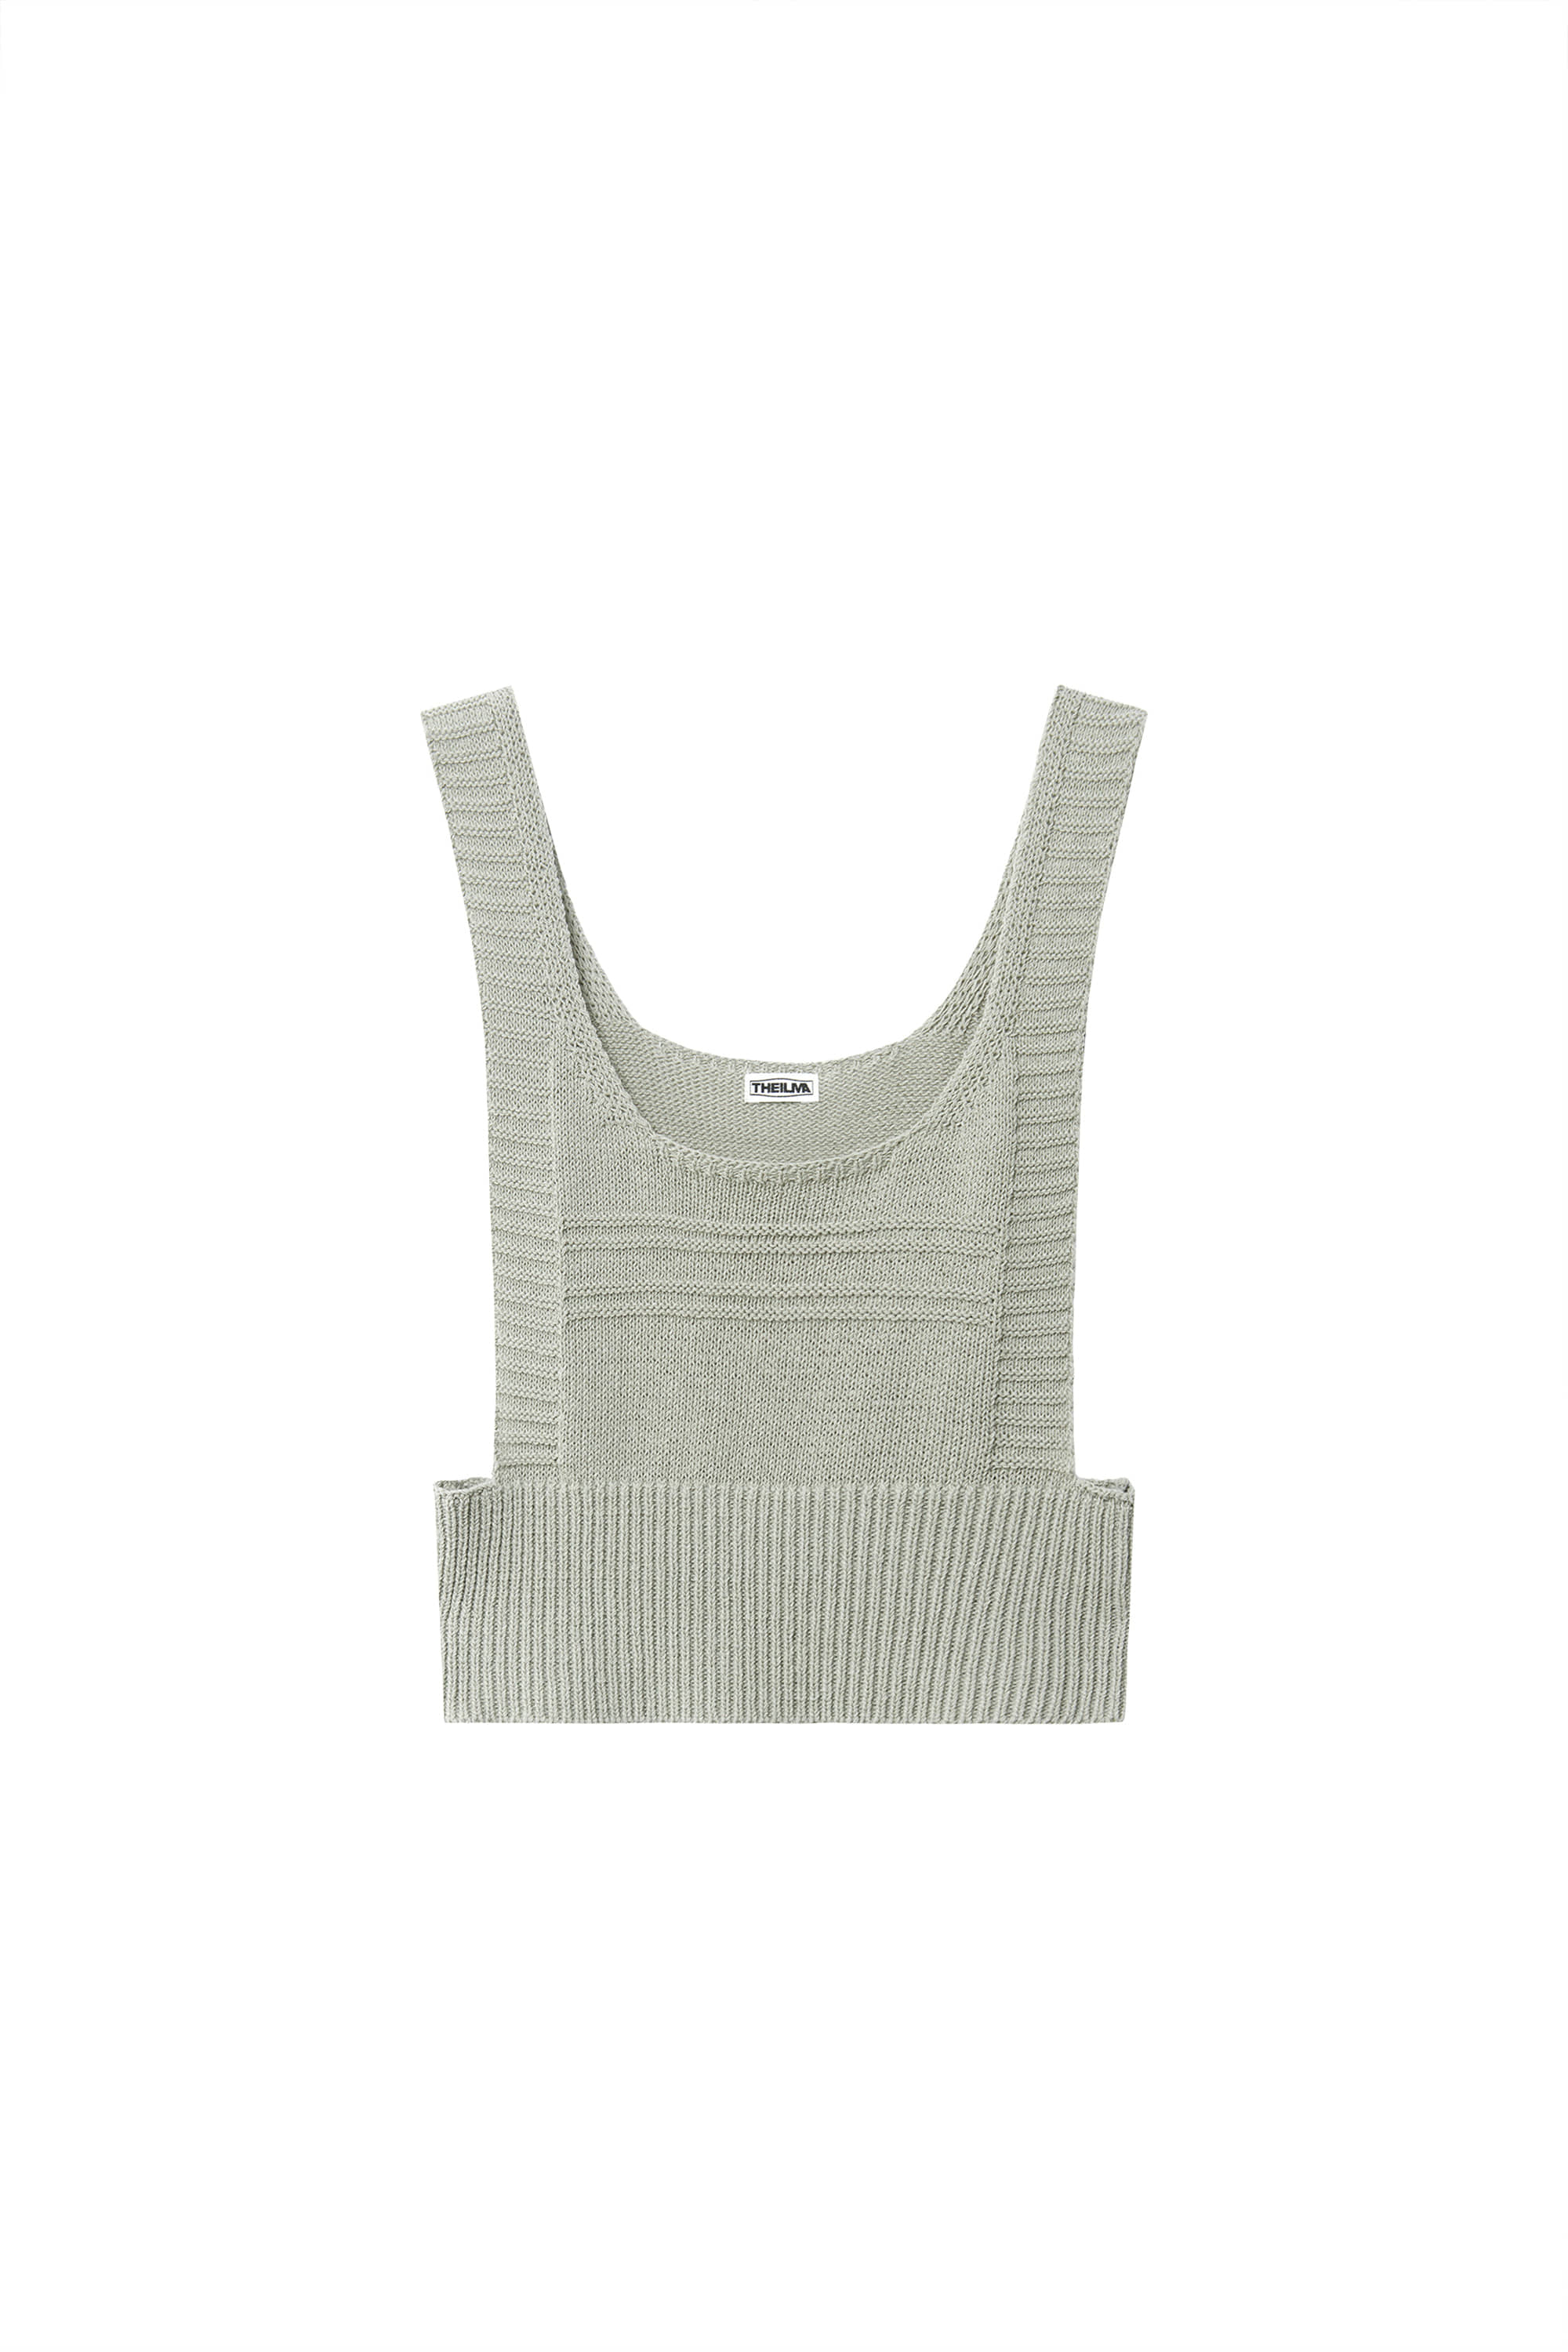 ODE LAYERED KNIT TOP (2 COLORS)